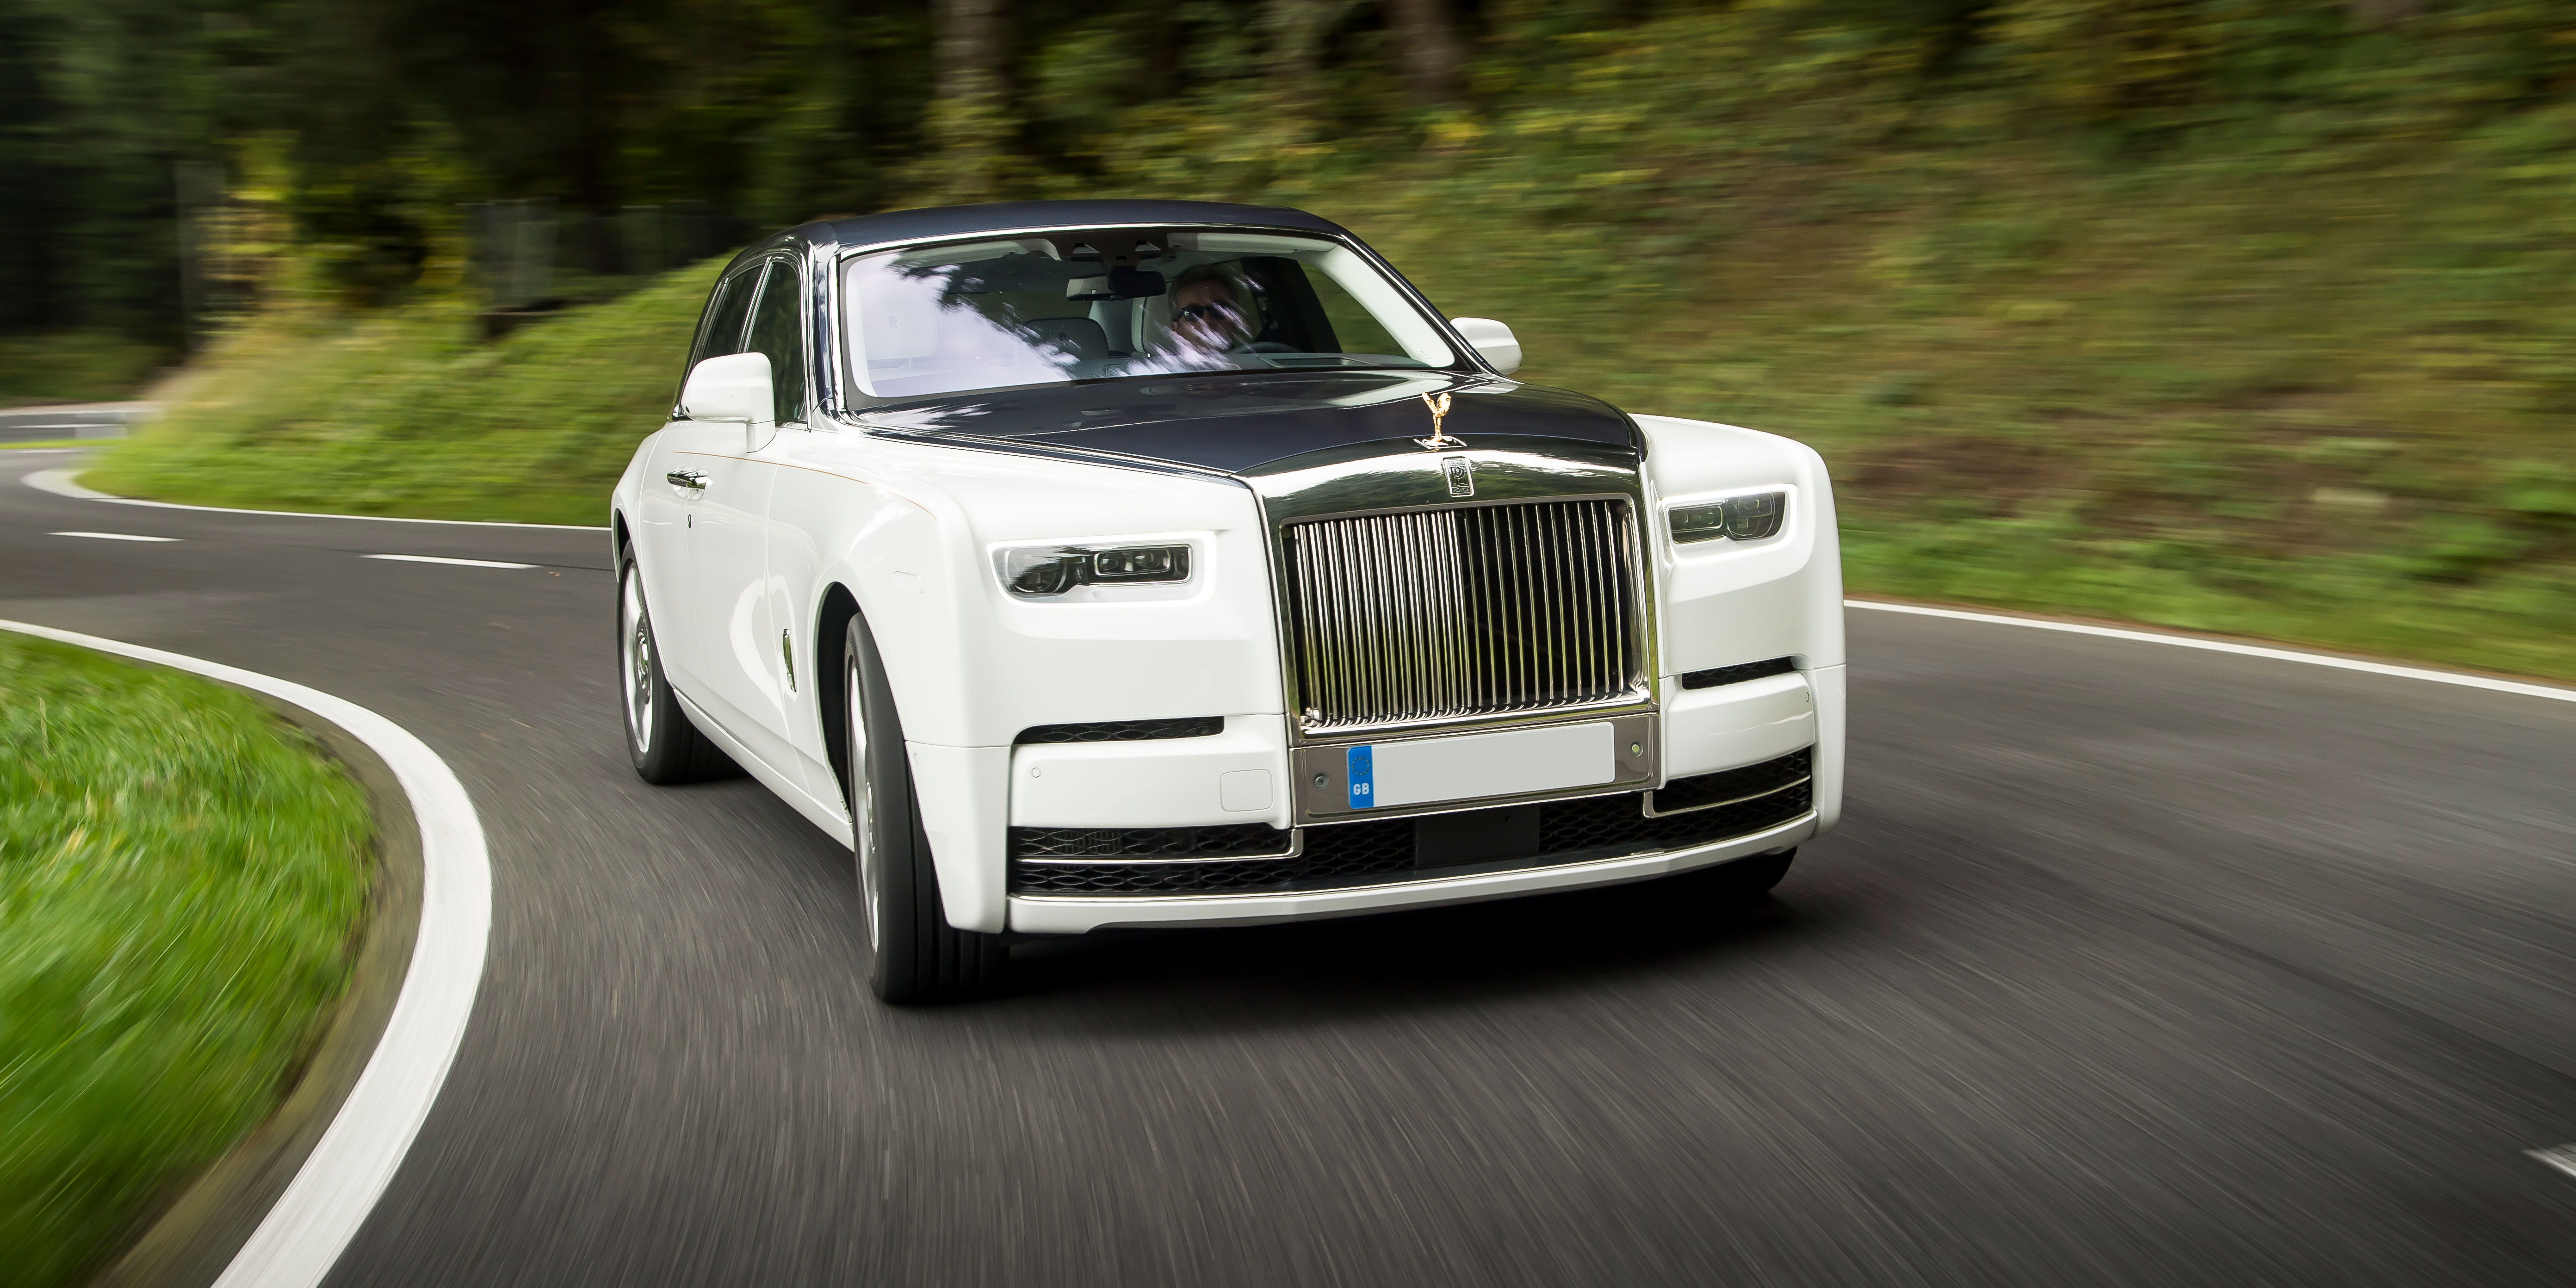 Cullinan rounds up RollsRoyce family DNA  Businessday NG